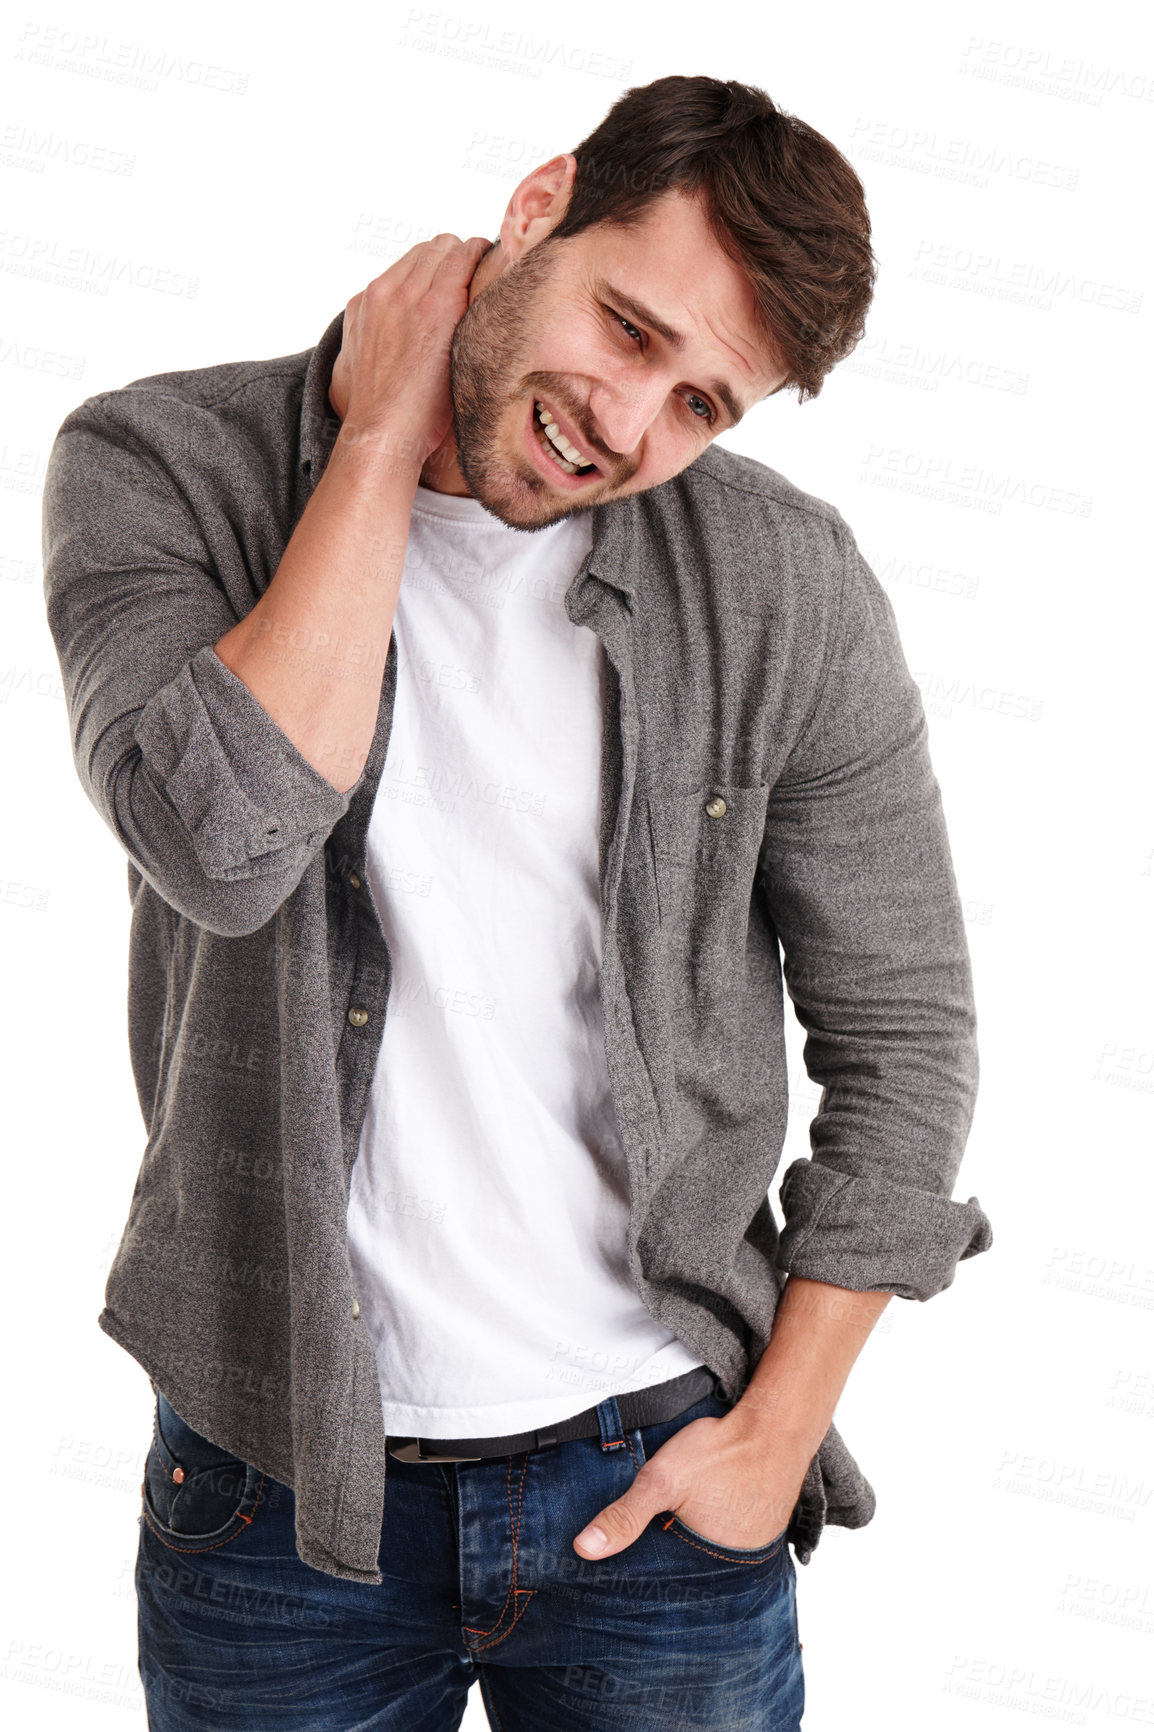 Buy stock photo Studio shot of a young man grimacing in pain while holding his neck